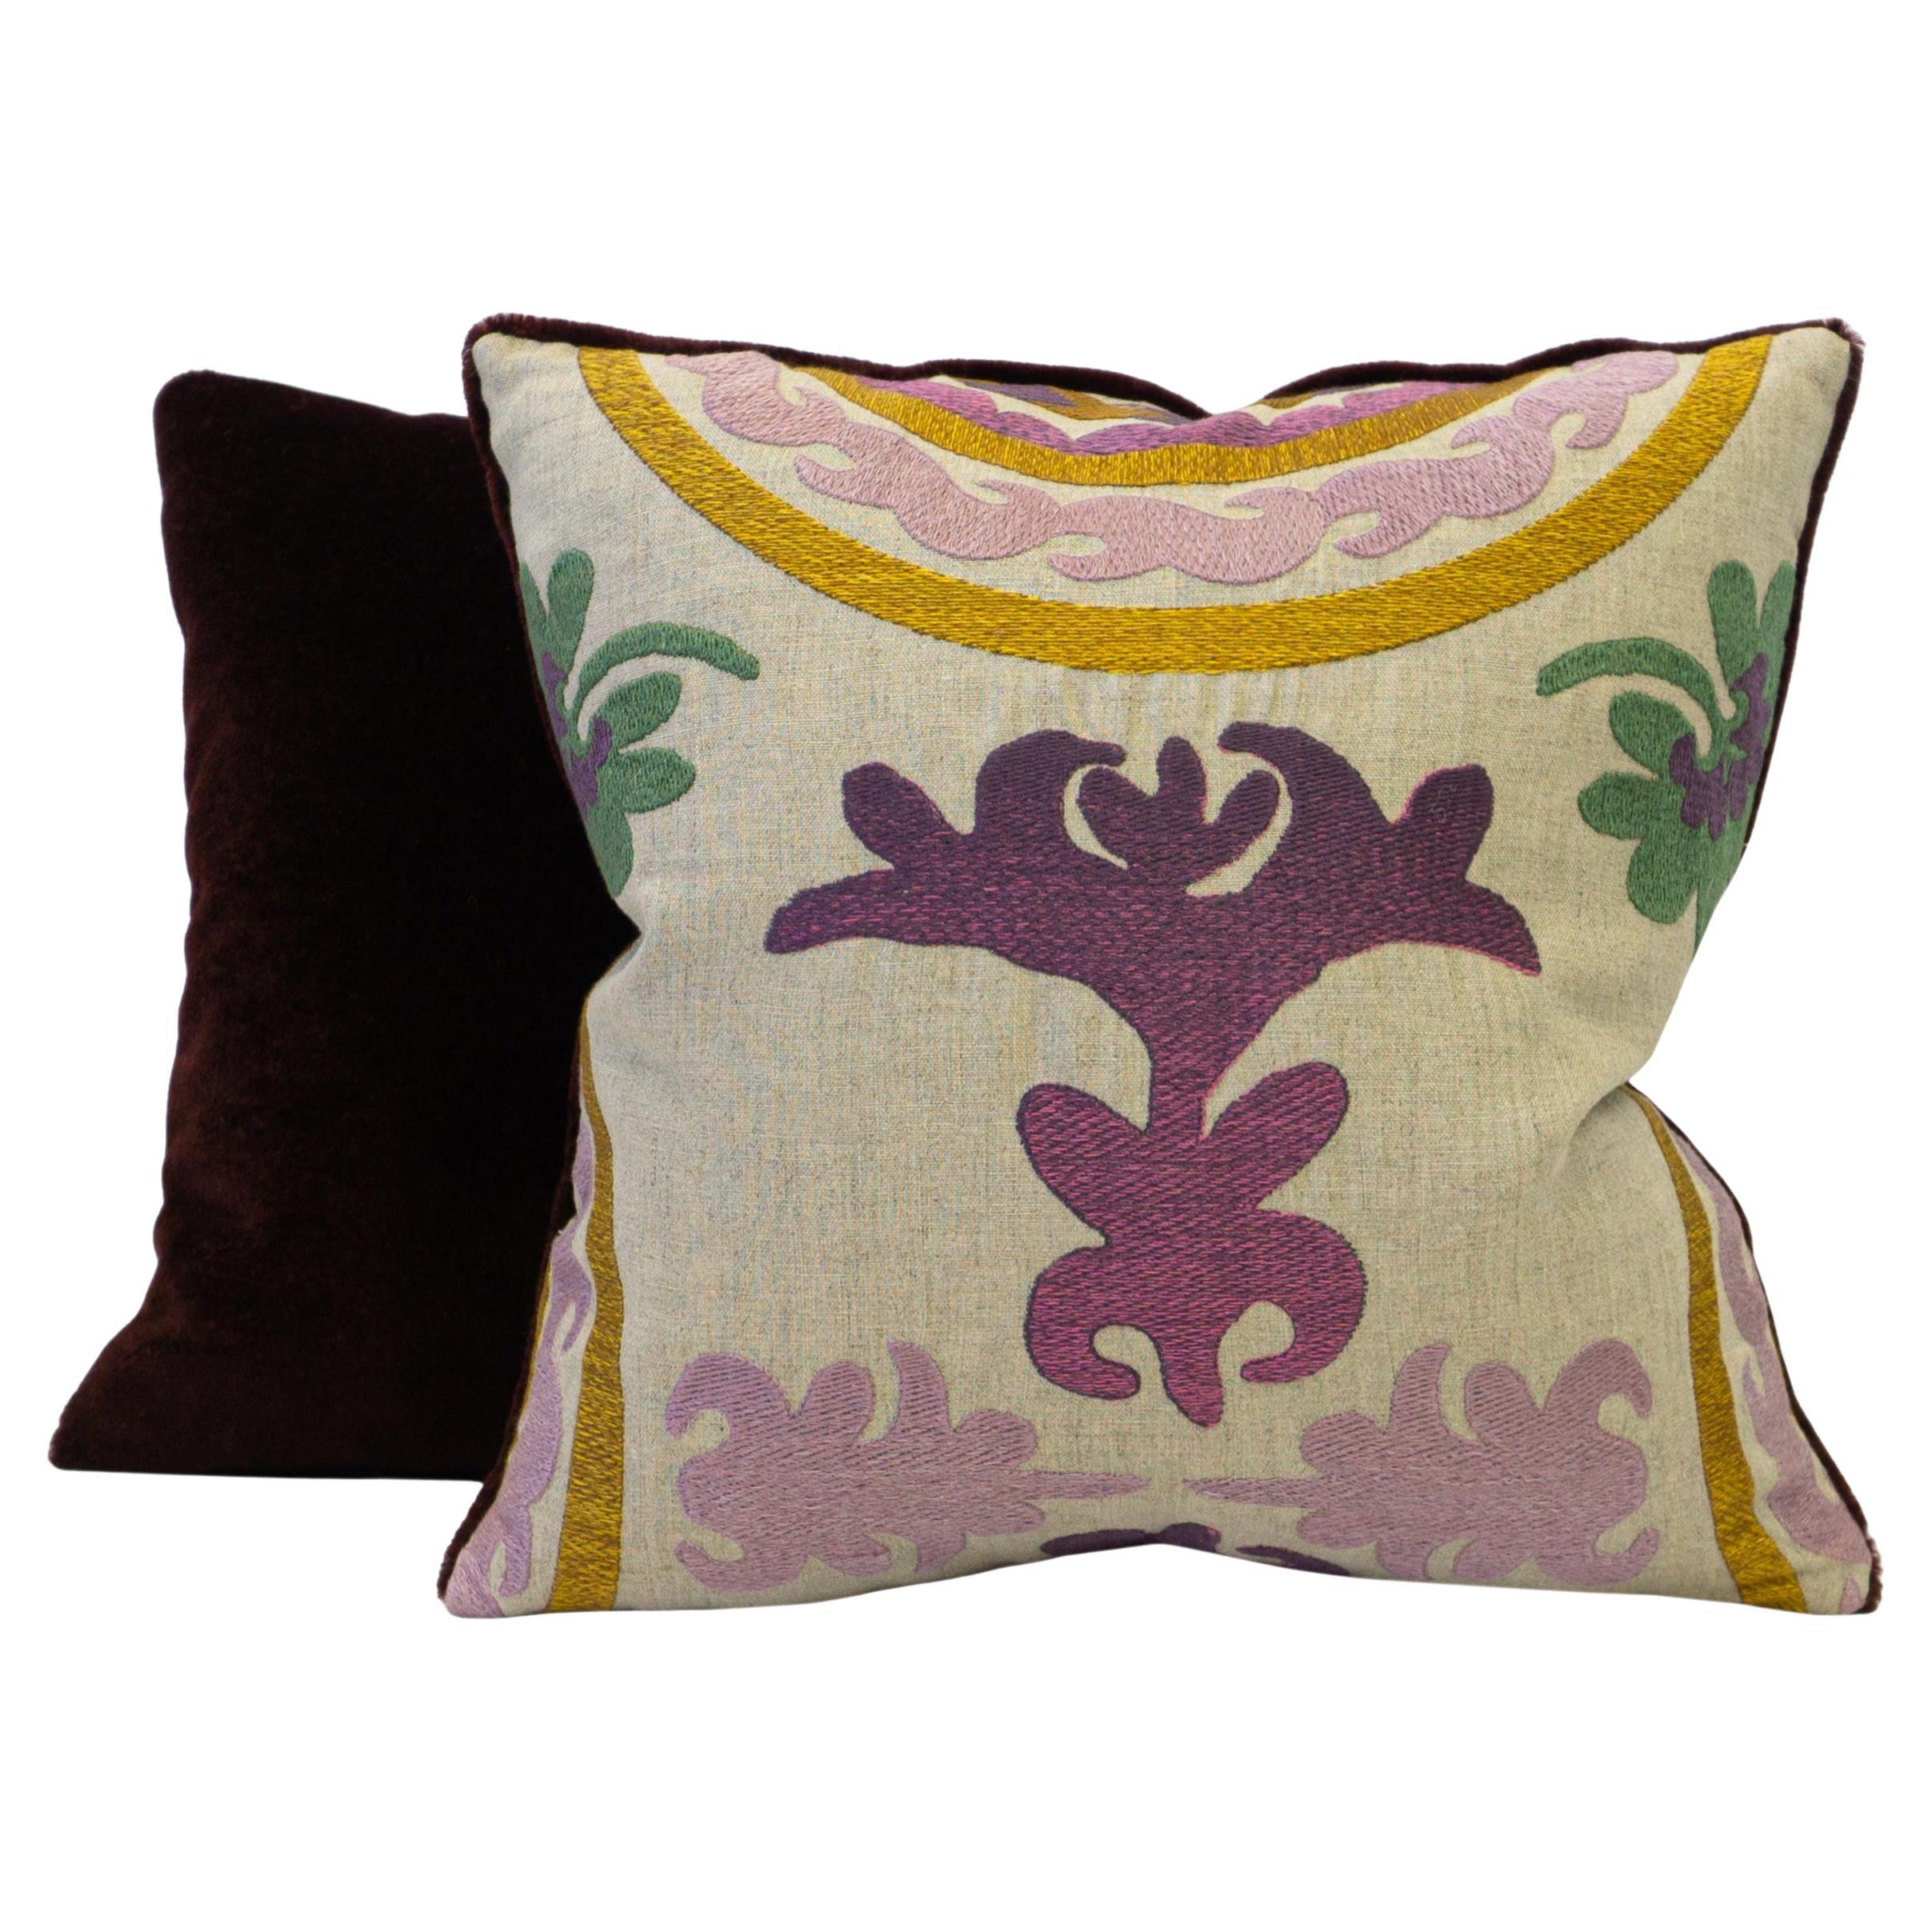 Embroidered Decorated Linen Velvet Fabric Square Pillow For Sale